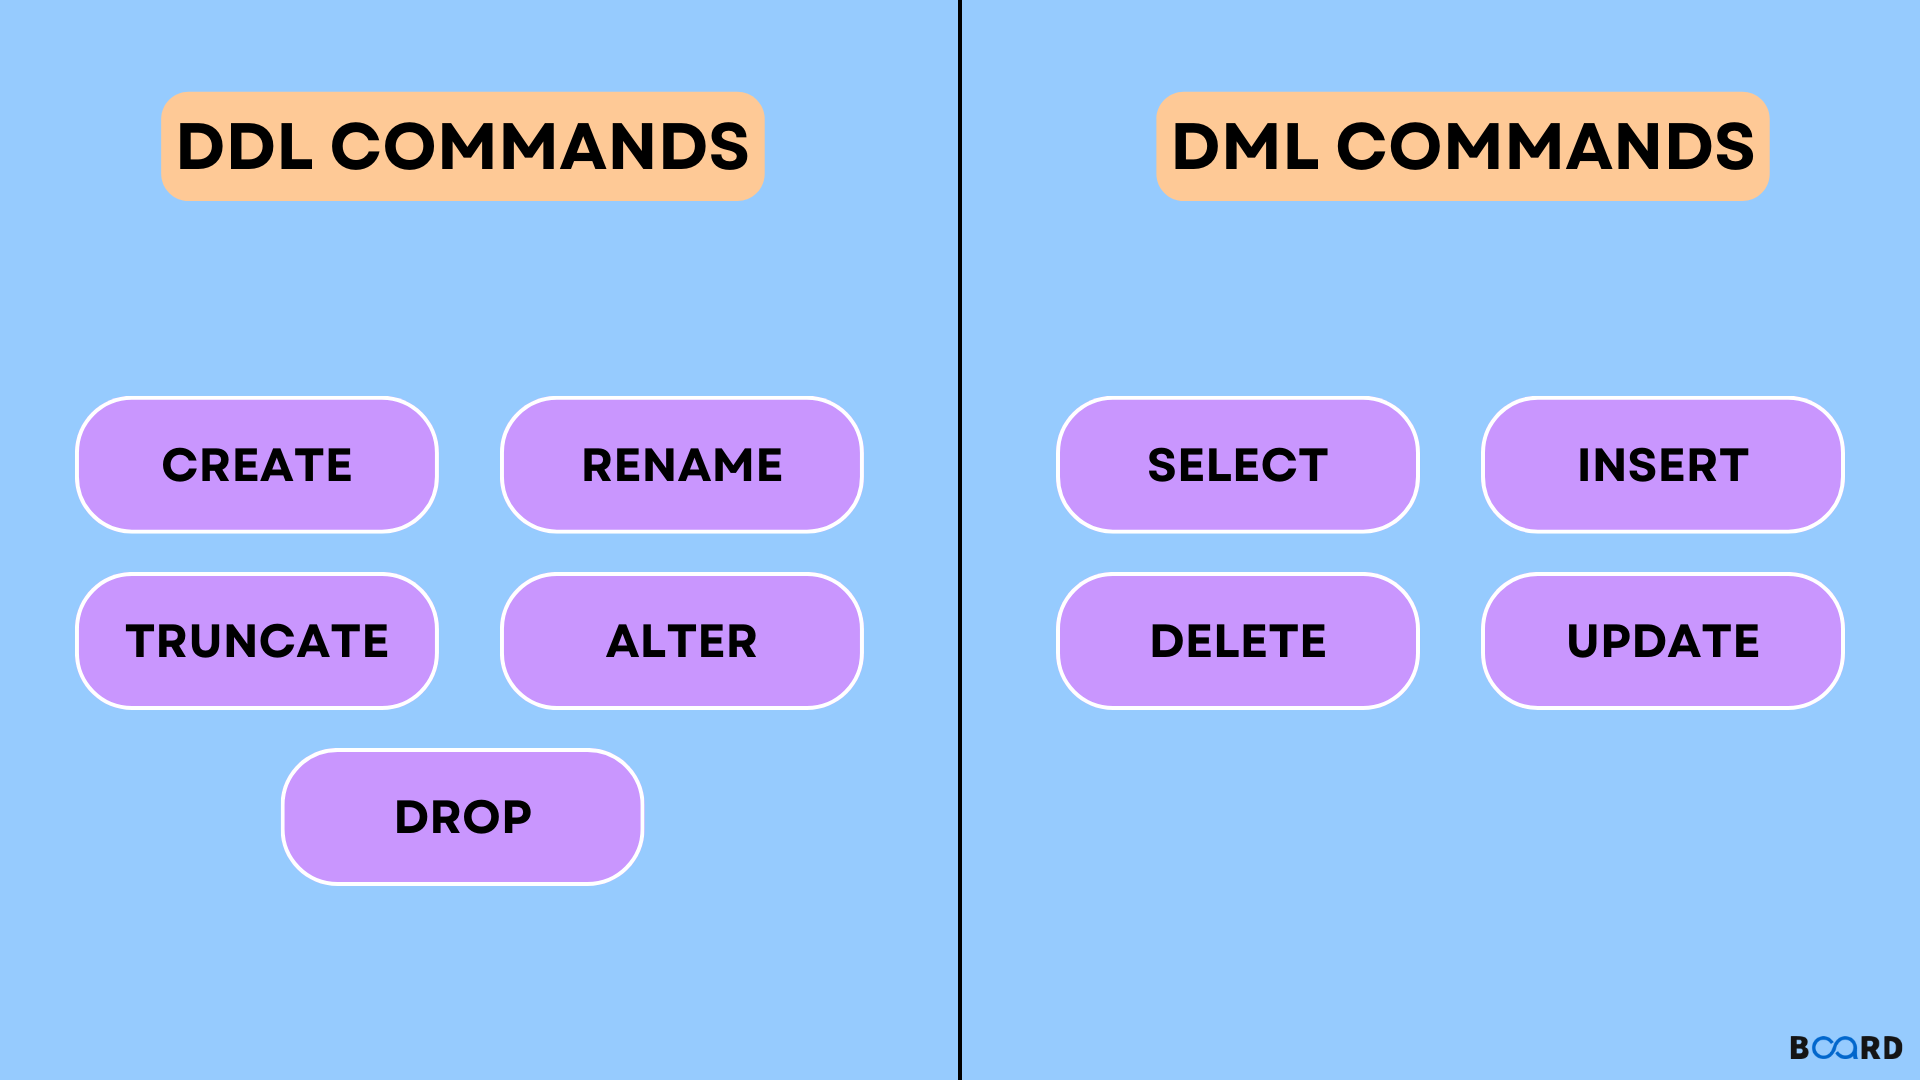 DDL and DML Commands: Explanation and Differences